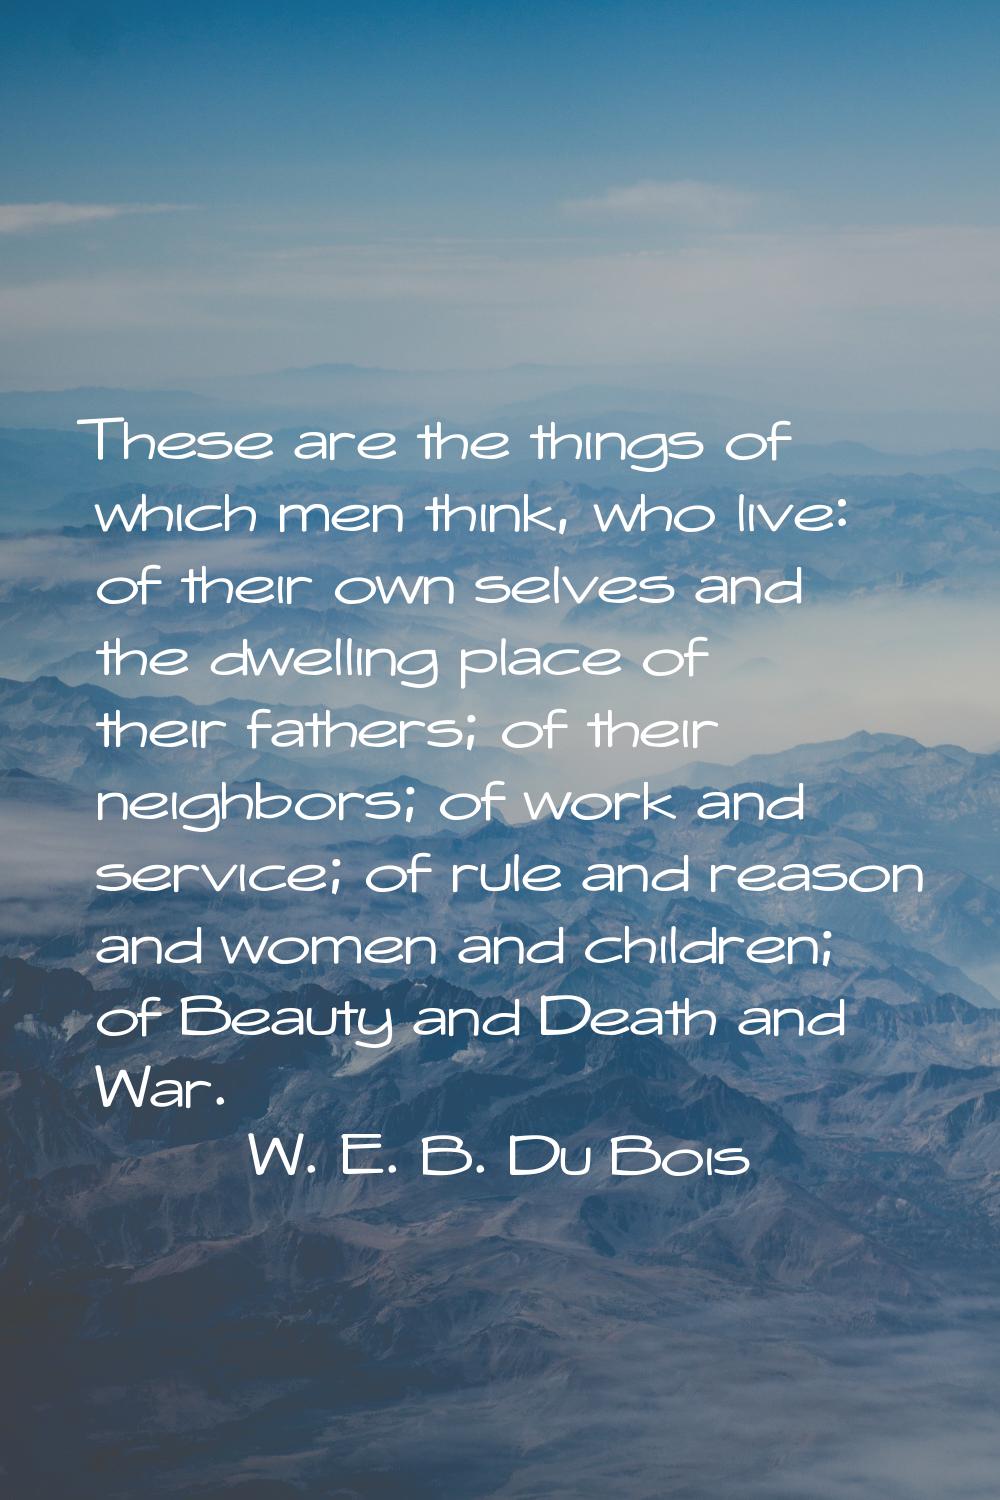 These are the things of which men think, who live: of their own selves and the dwelling place of th